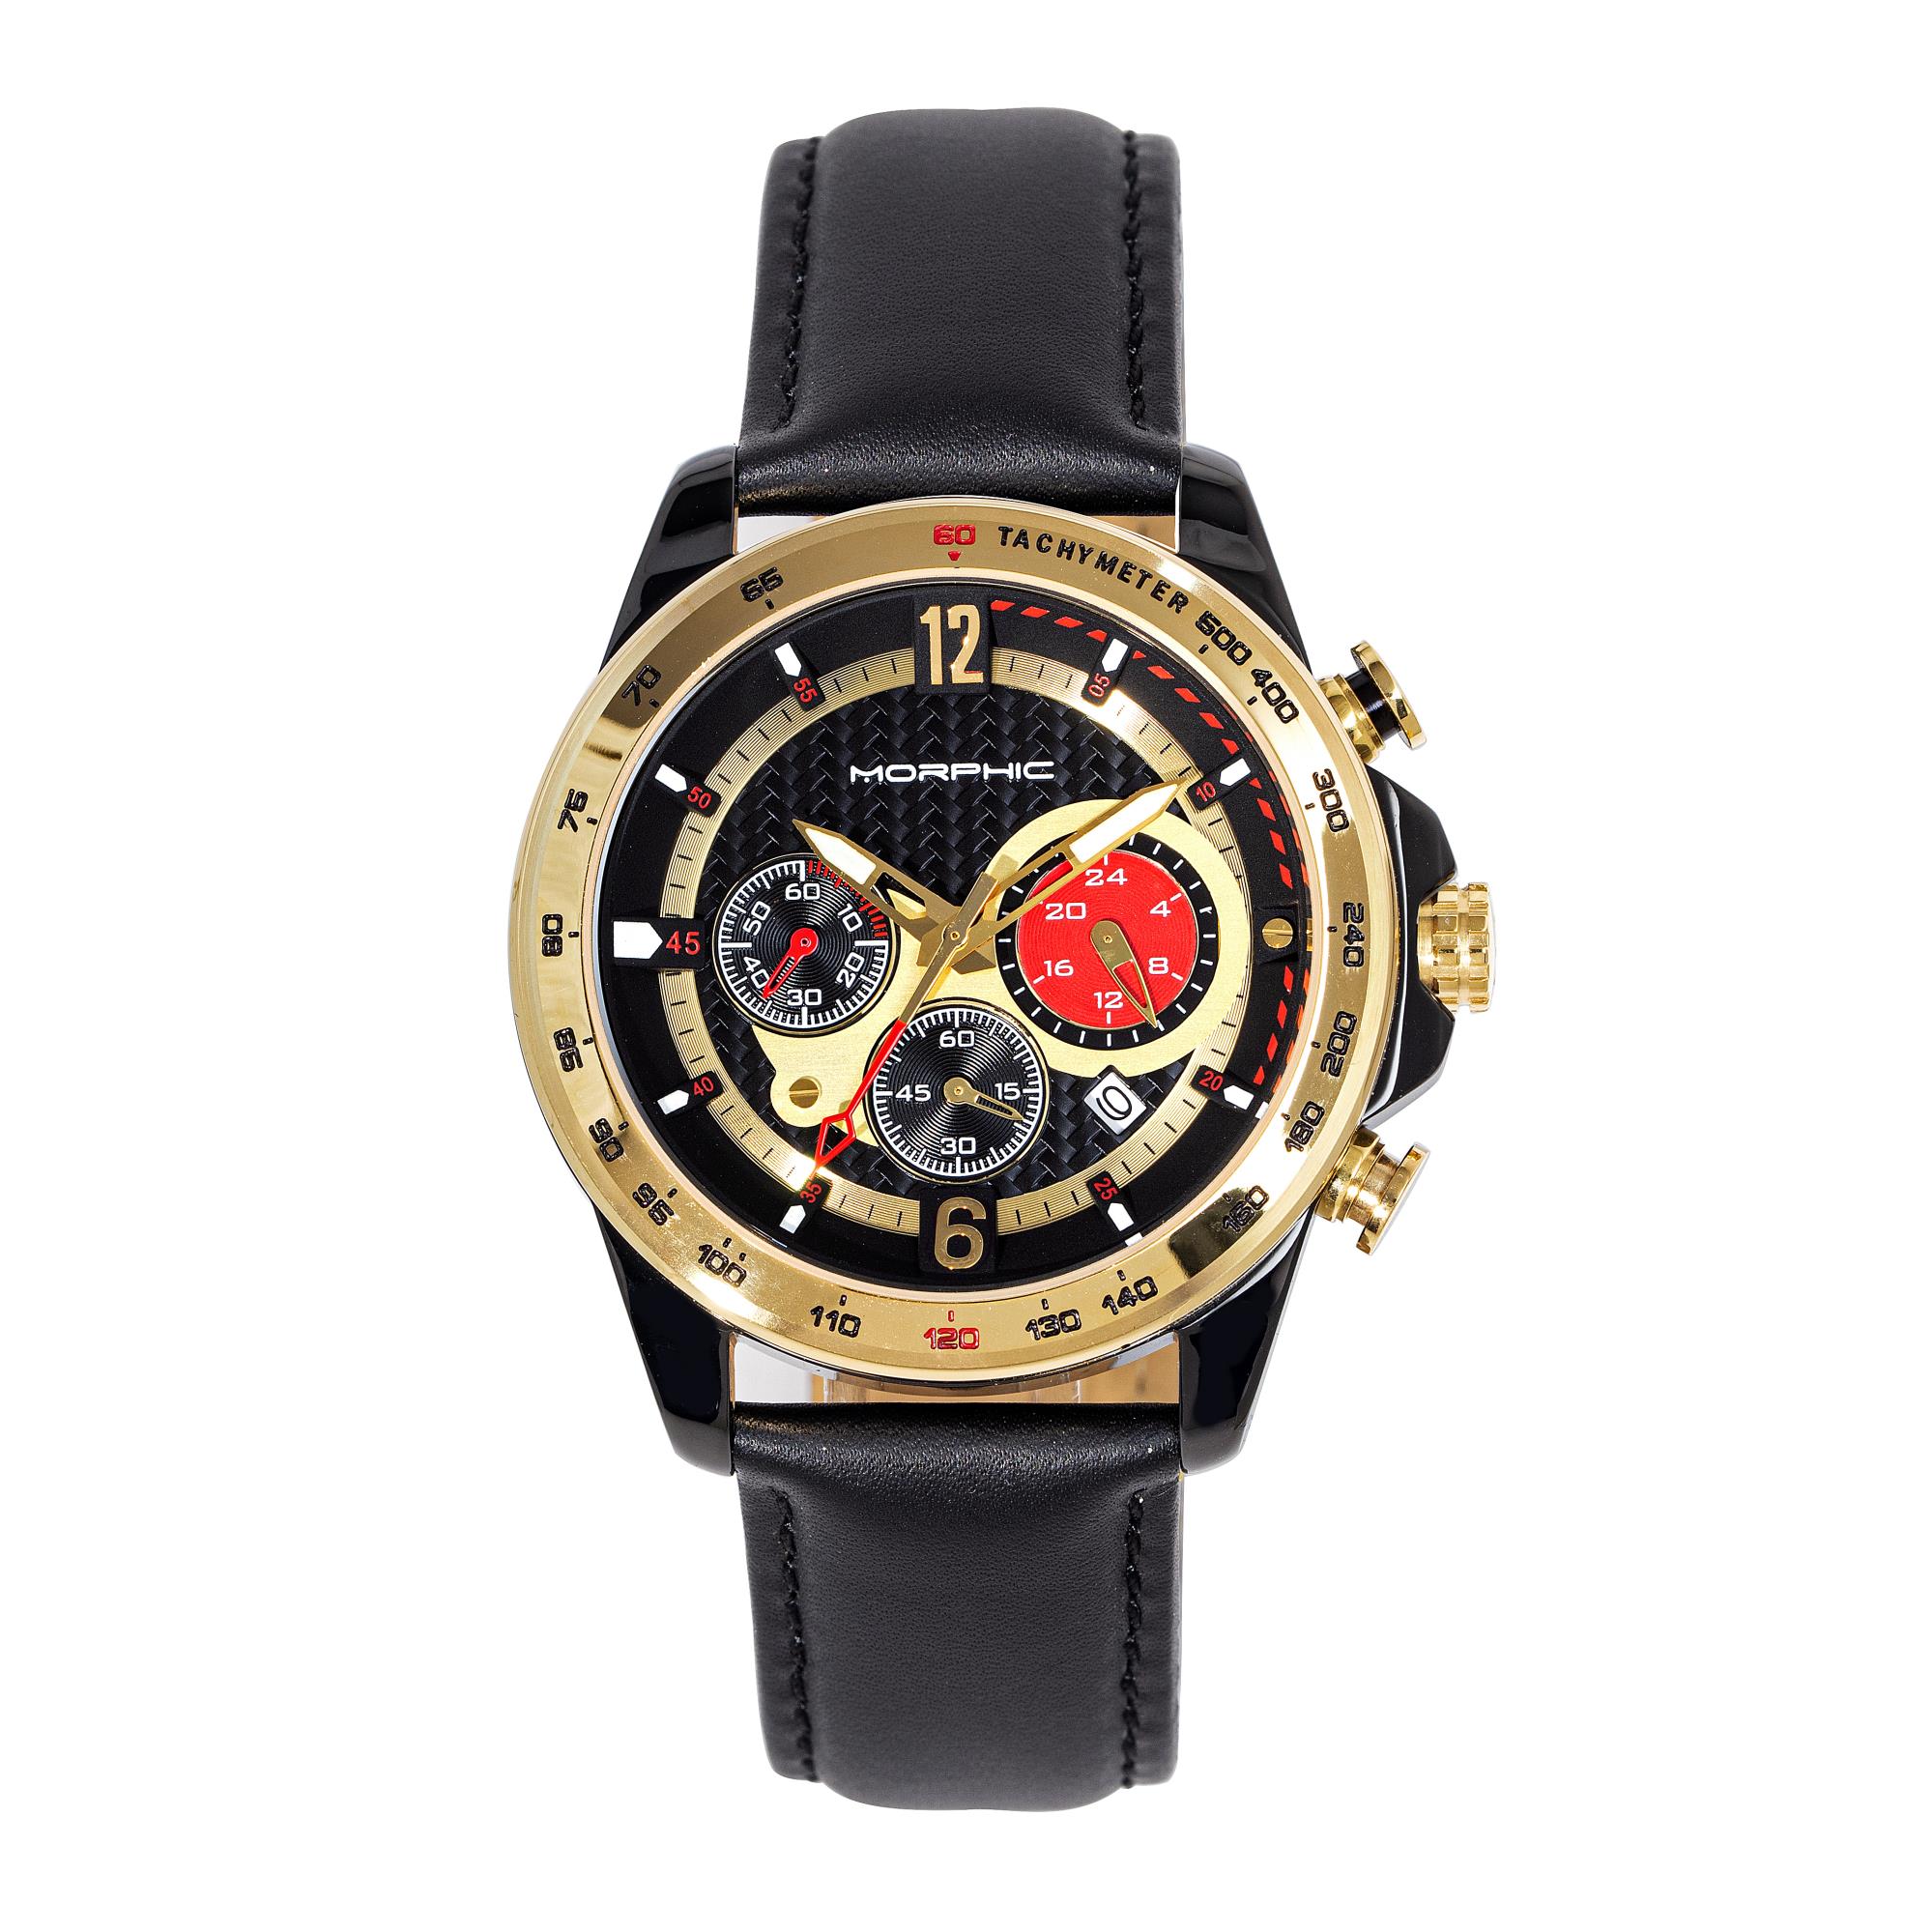 Morphic M88 Series Chronograph Leather-band Watch W/date - Black/gold